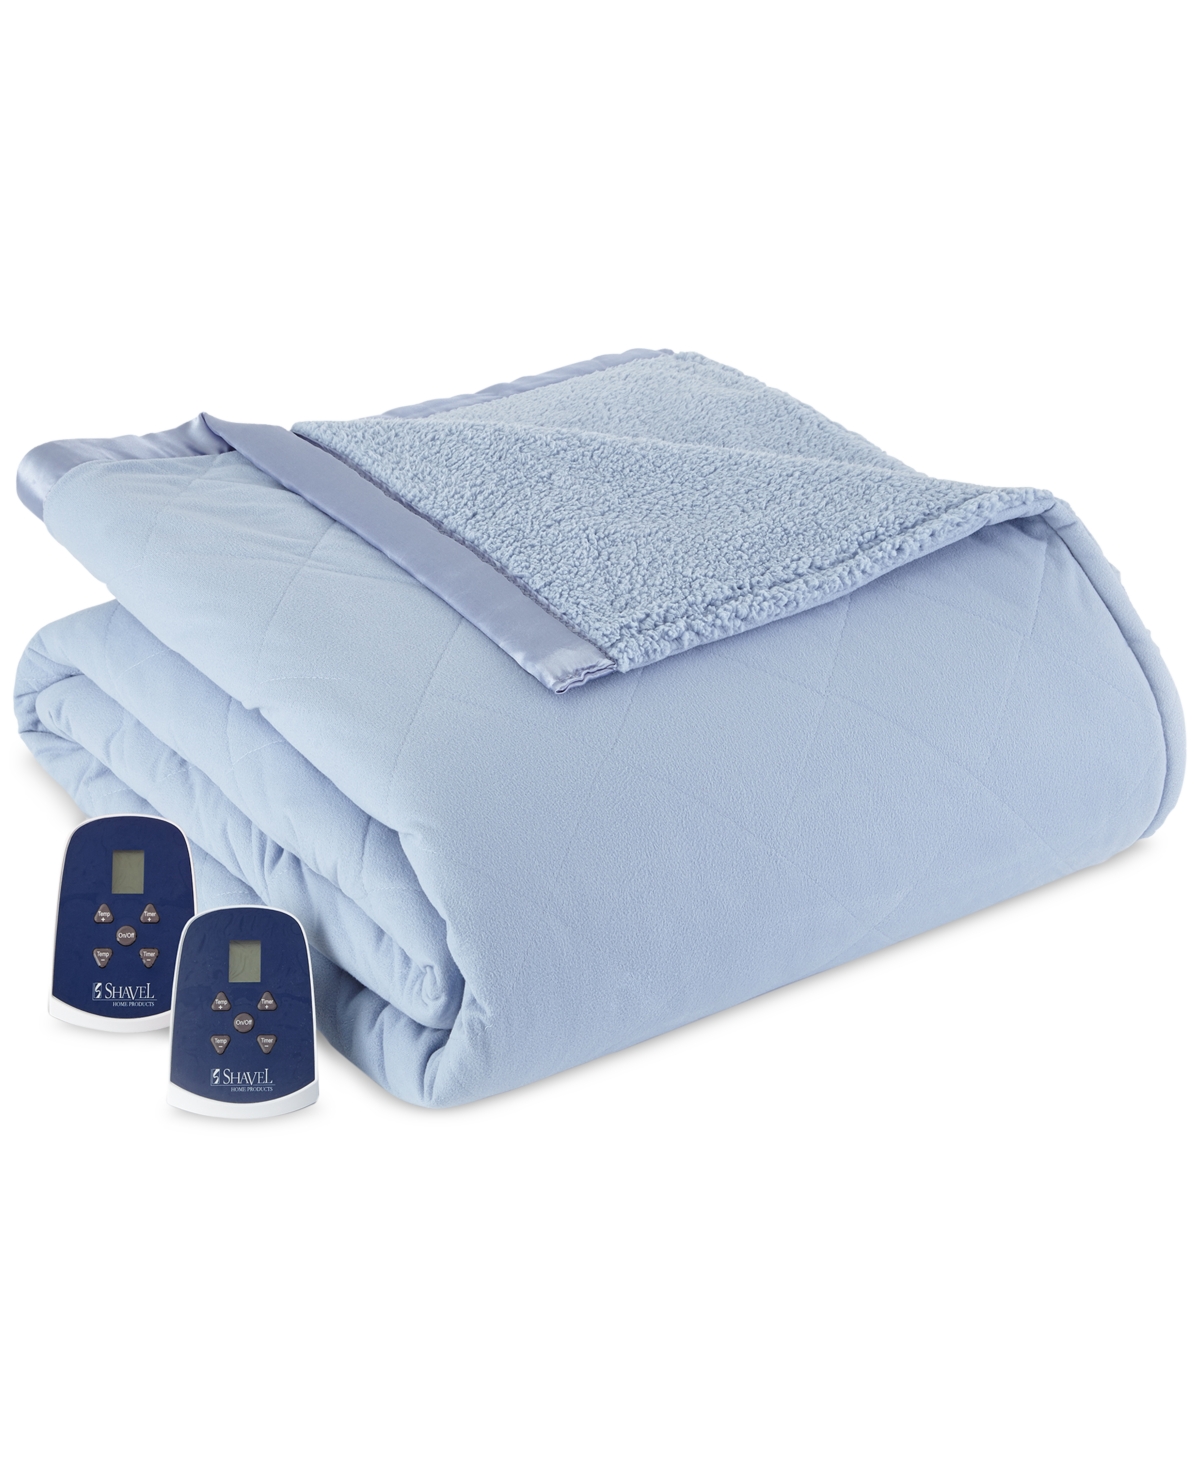 Shavel Reversible Micro Flannel To Sherpa Twin Electric Blanket Bedding In Wedgewood